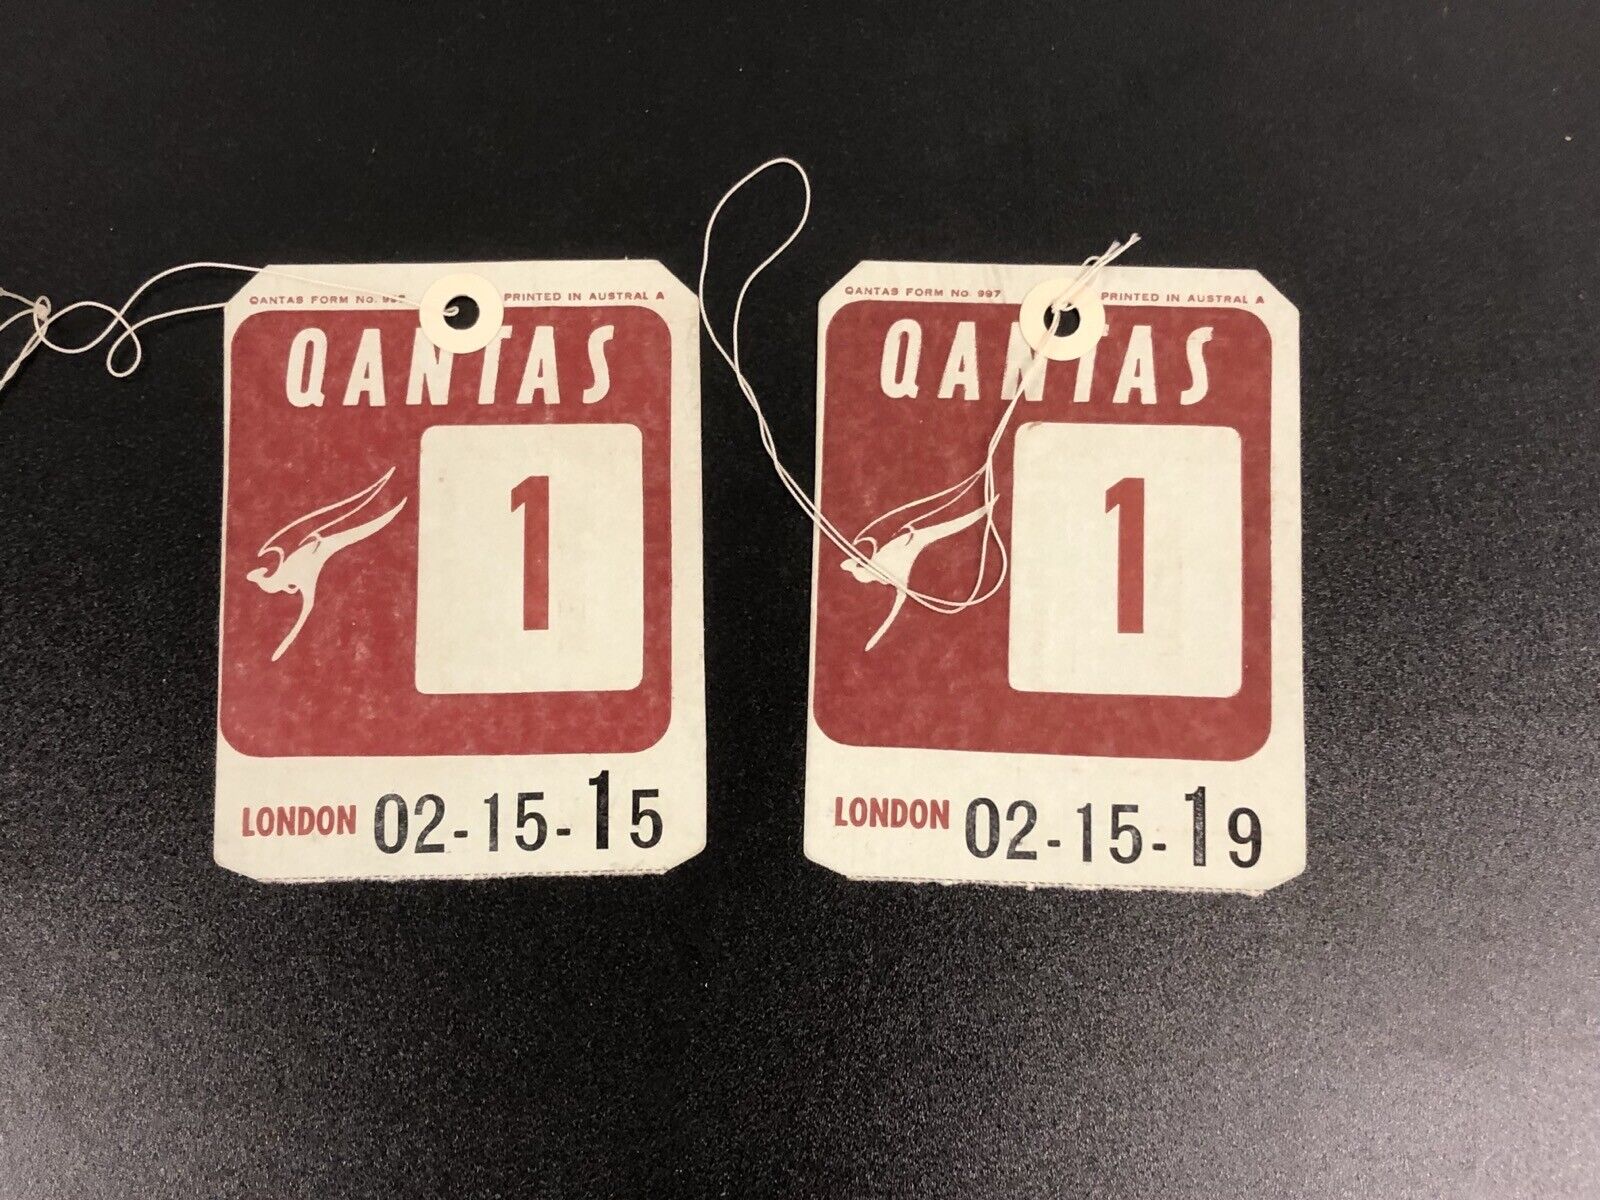 2x Qantas Baggage/Luggage Tags/Labels From The 1970s (North America Route)